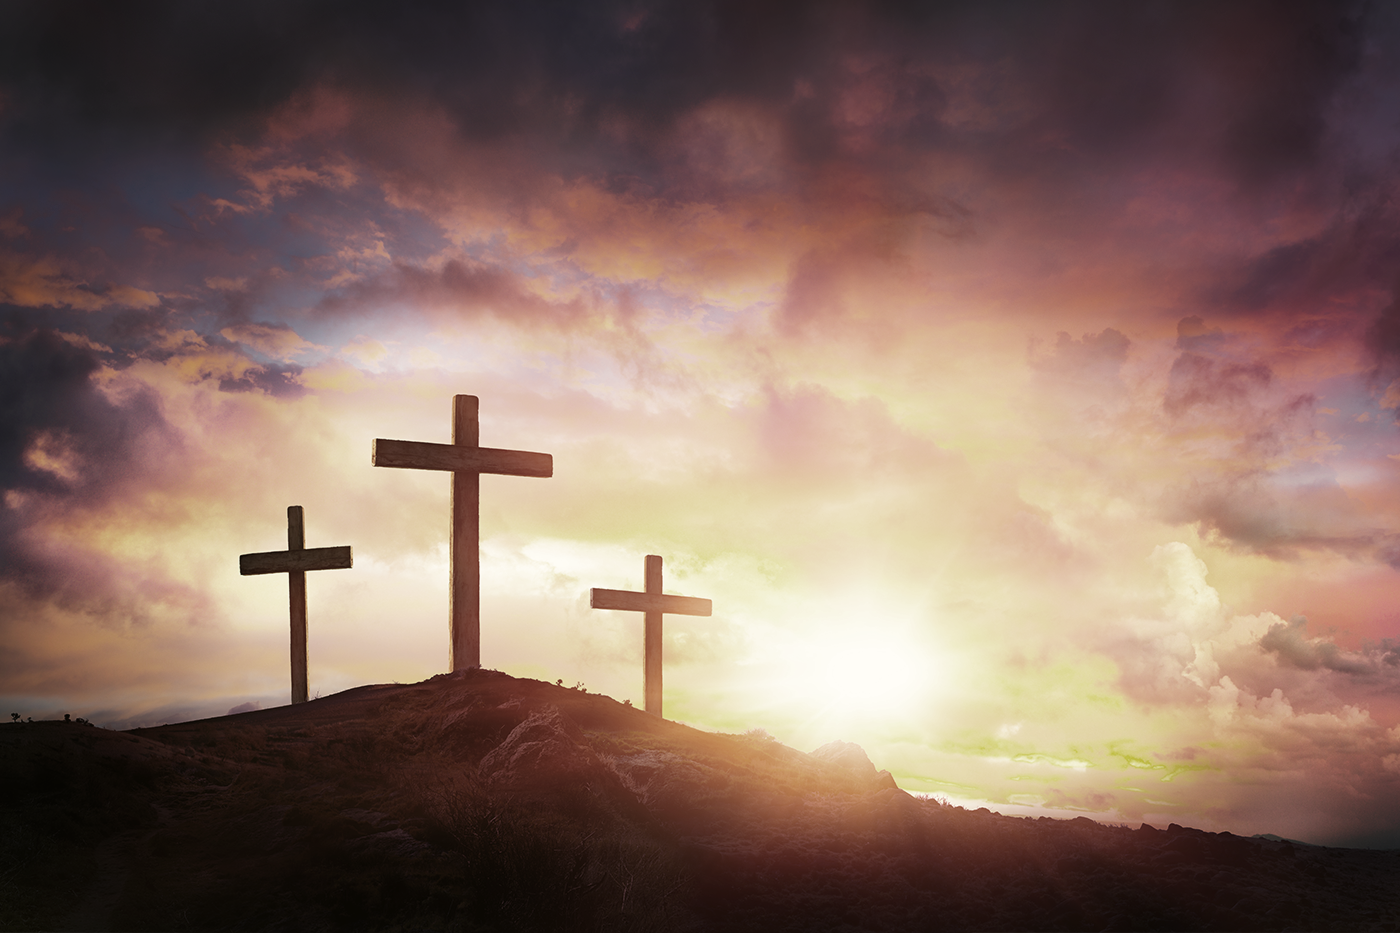 image of 3 crosses on a hill